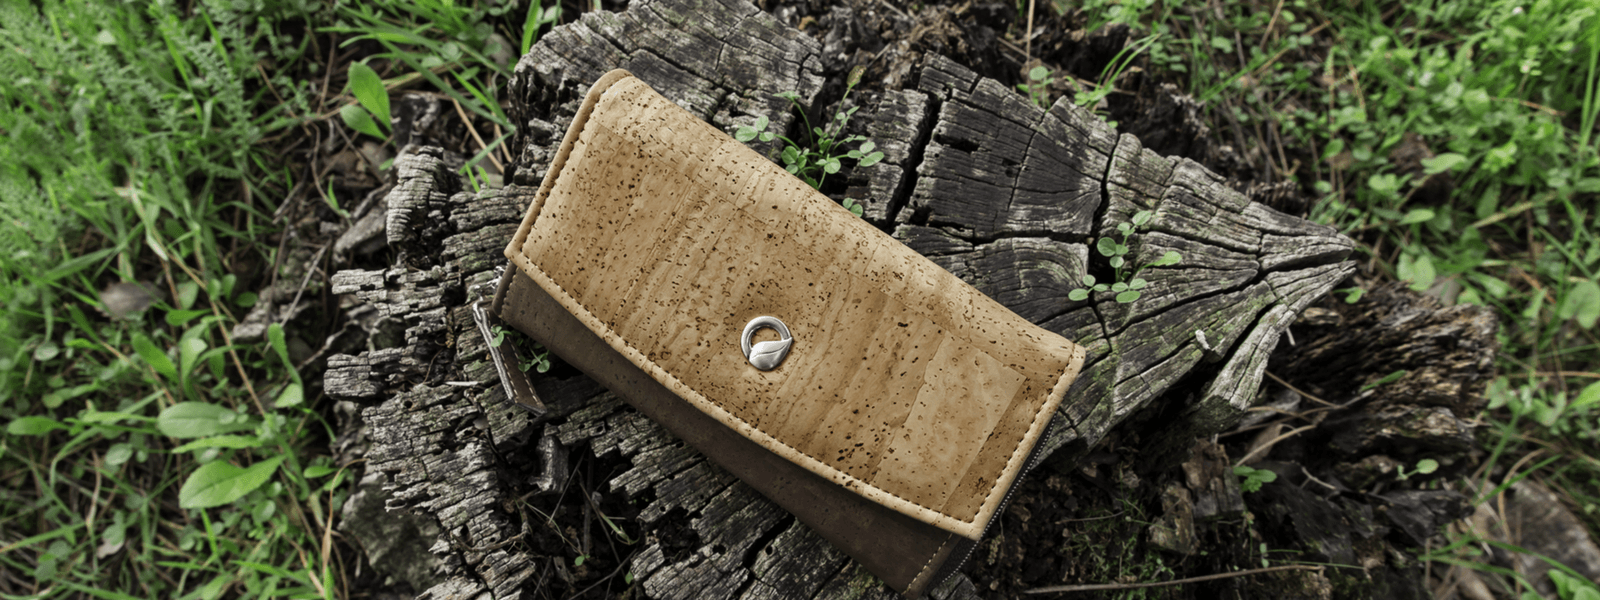 Find a Vegan Wallet That Ticks All Your Boxes | Corkor